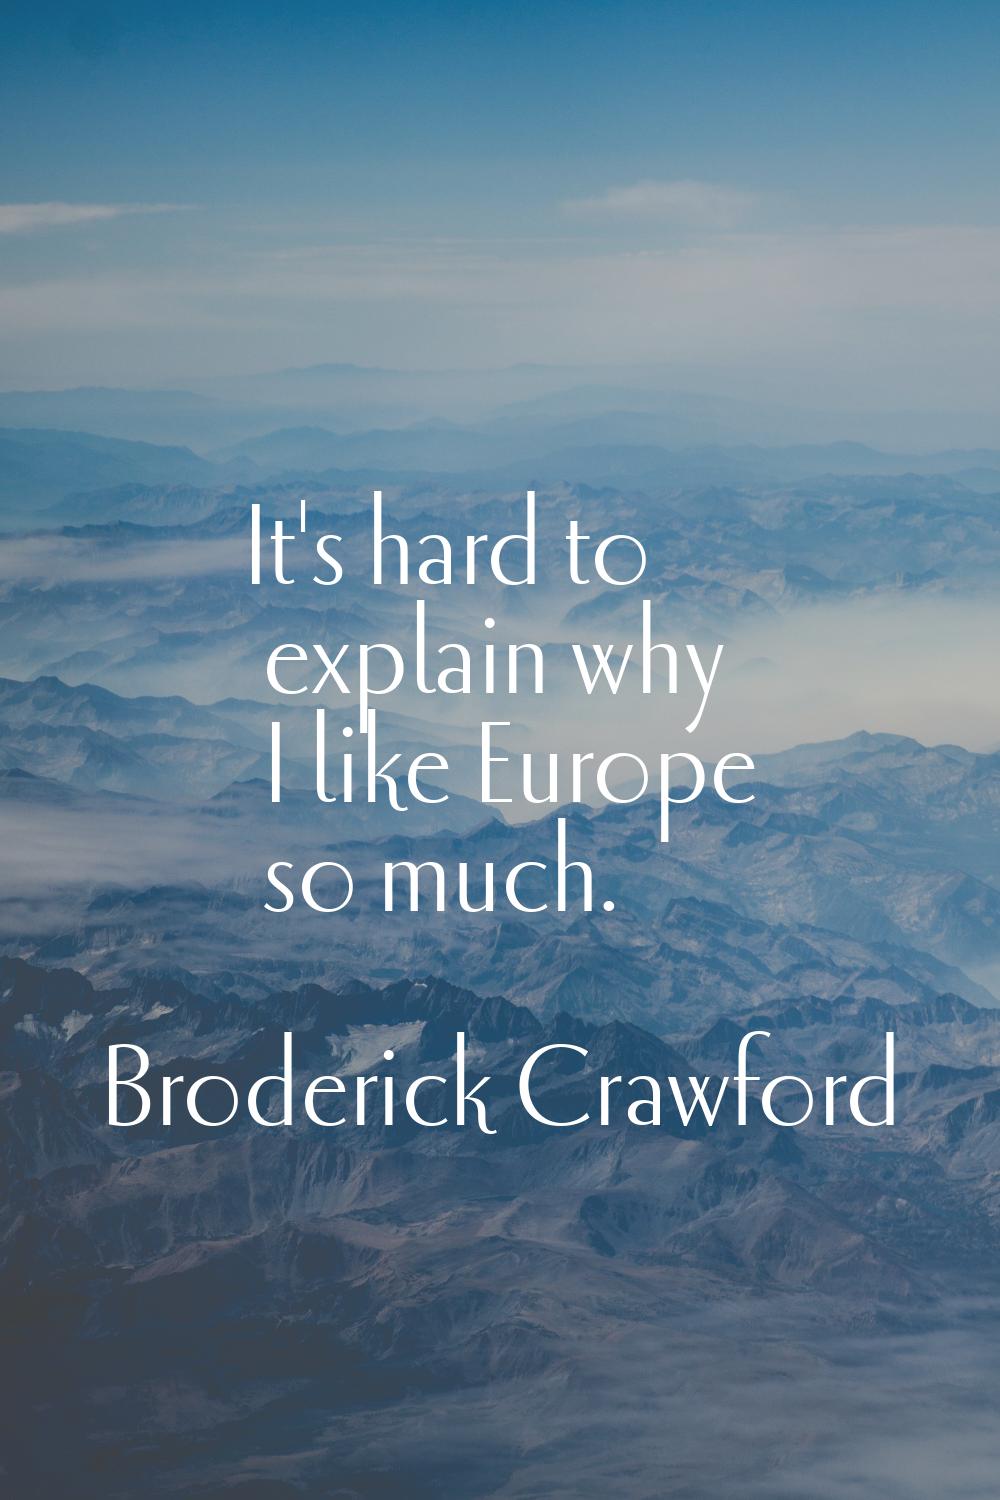 It's hard to explain why I like Europe so much.